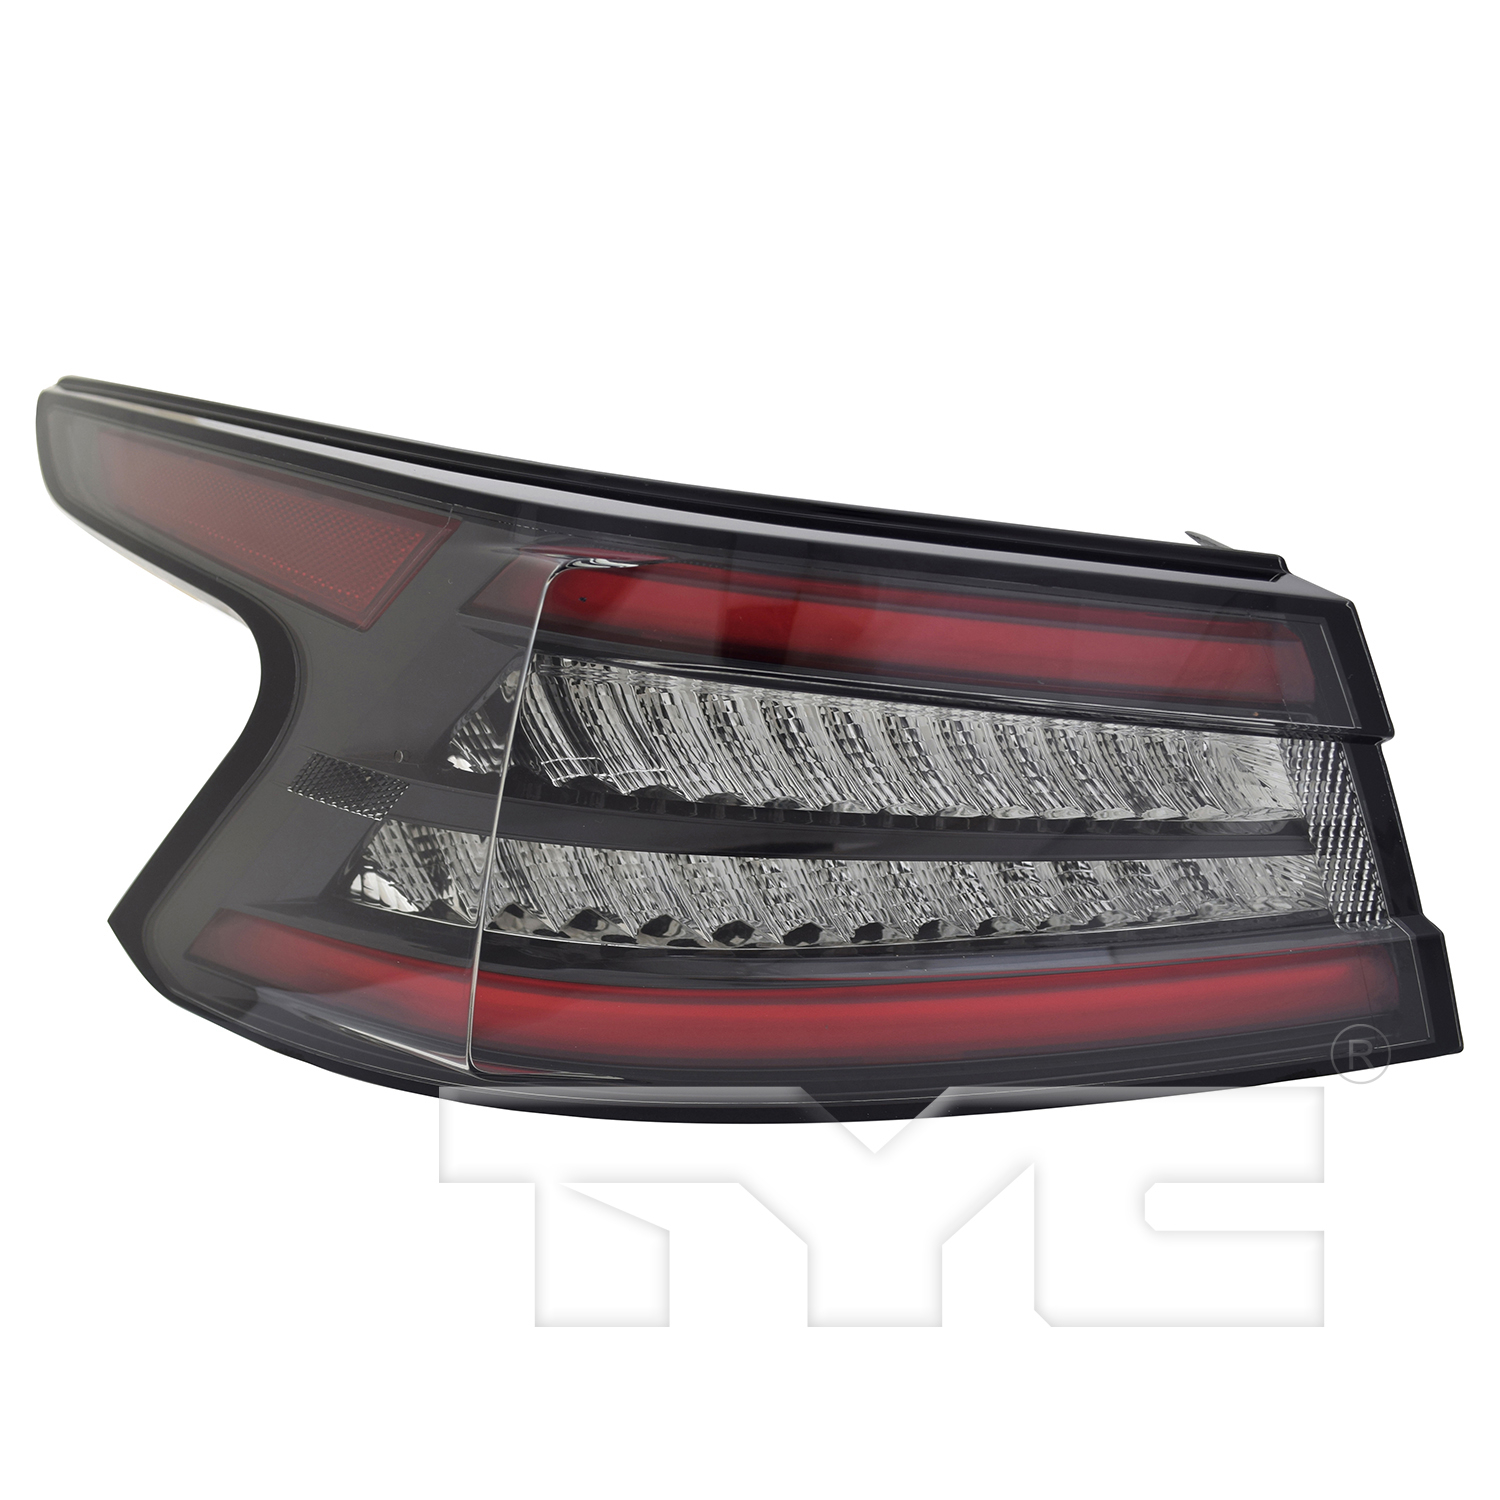 TYC Left Side LED Tail Light Assy for Nissan Maxima 2019-2021 Models